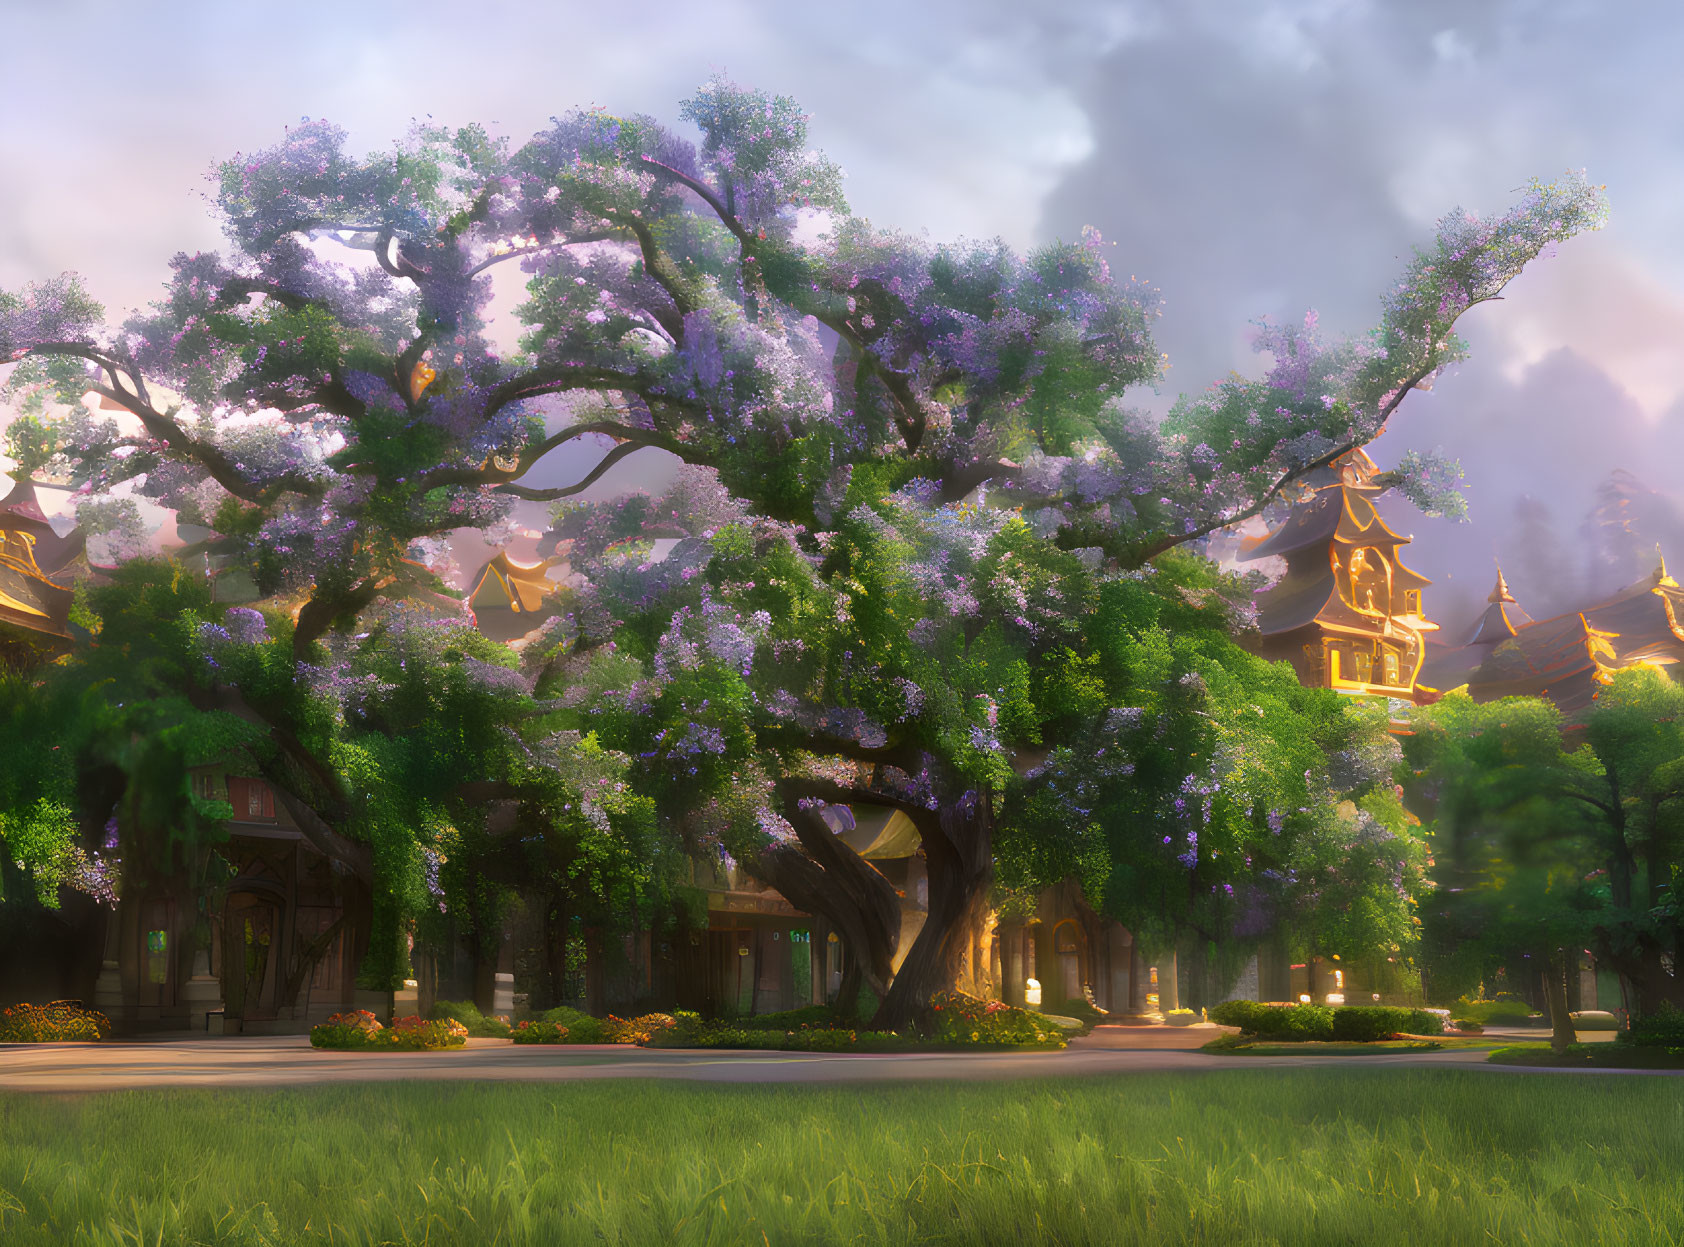 Majestic tree with purple blossoms in tranquil garden with traditional-style buildings.